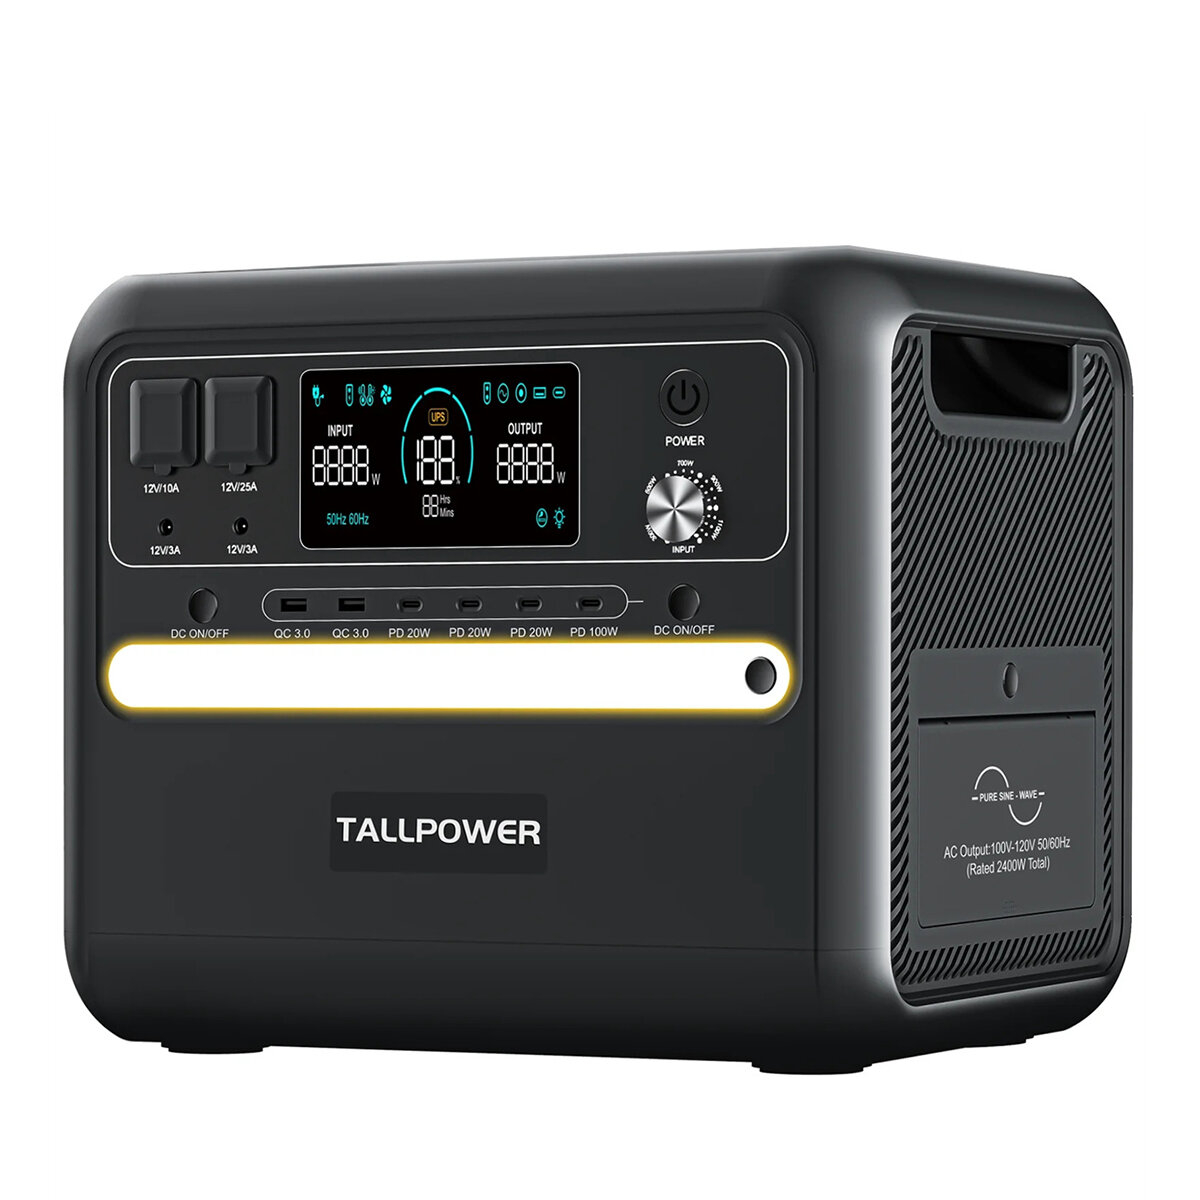 [EU Direct] TALLPOWER V2400 Draagbare energiecentrale 2160Wh LiFePo4 Zonne-generator, 2400W AC-uitgang, Instelbaar invoervermogen, PD 100W USB-C, UPS-functie, LED-licht, 13 uitgangen